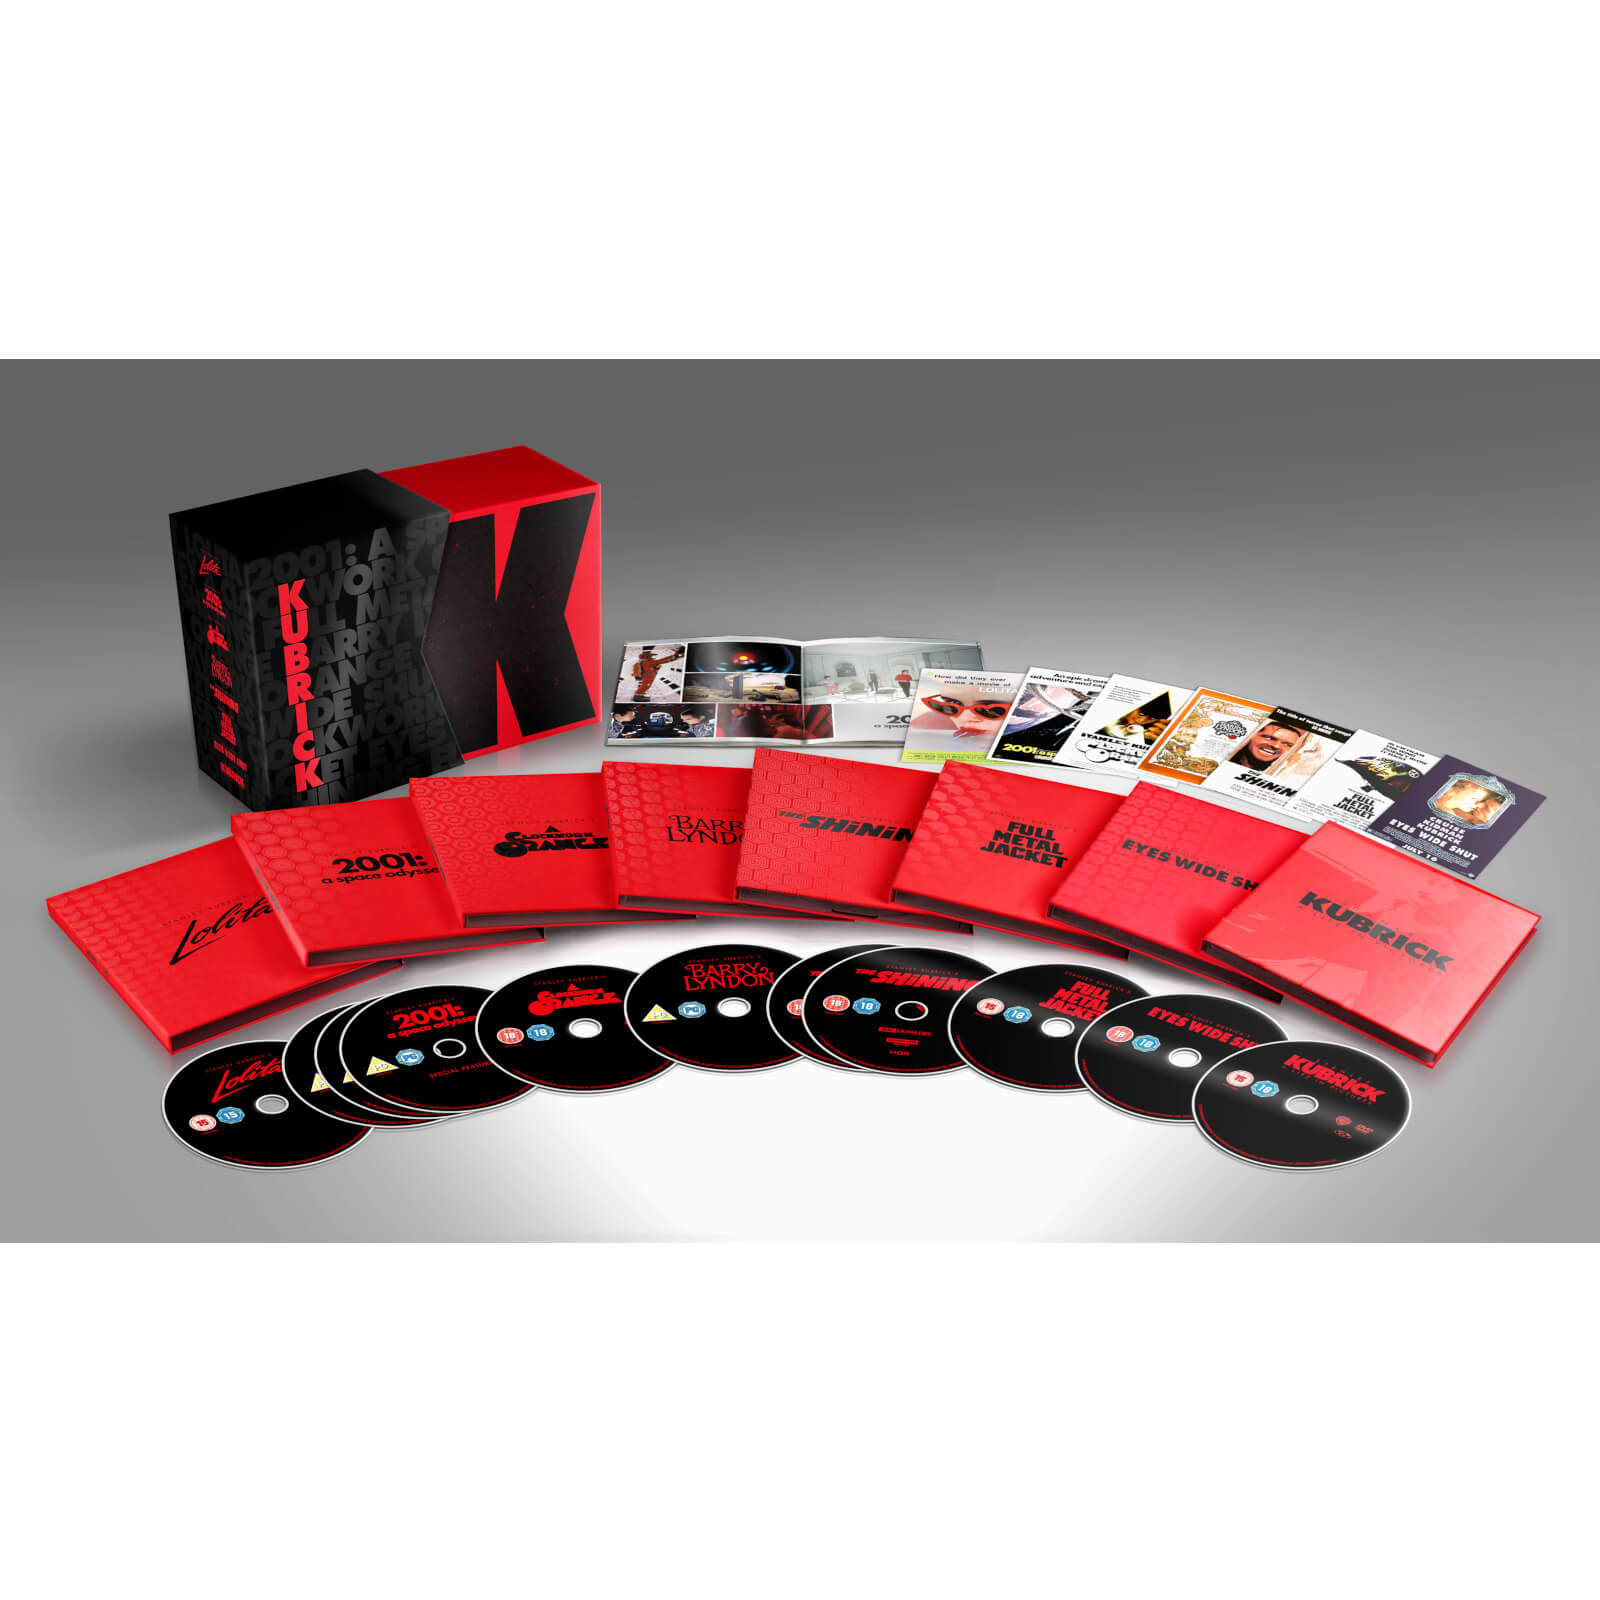 Stanley Kubrick Limited Edition Film Collection